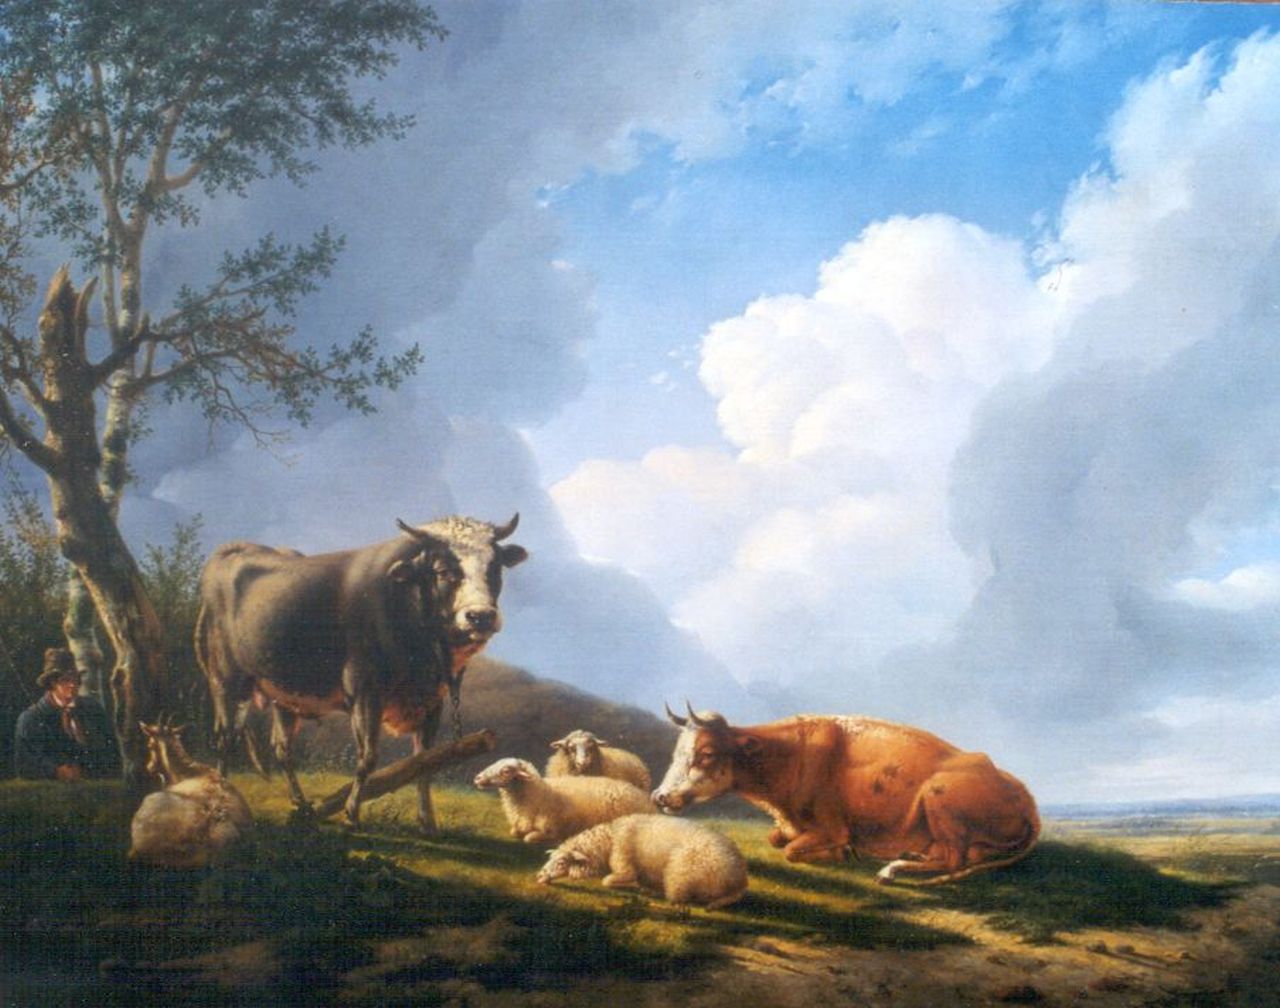 Hagenbeek Ch.  | Charles Hagenbeek, Cows and sheep resting in a summer landscape, Öl auf Leinwand 89,2 x 118,7 cm, signed with monogram on bull and tree trunk